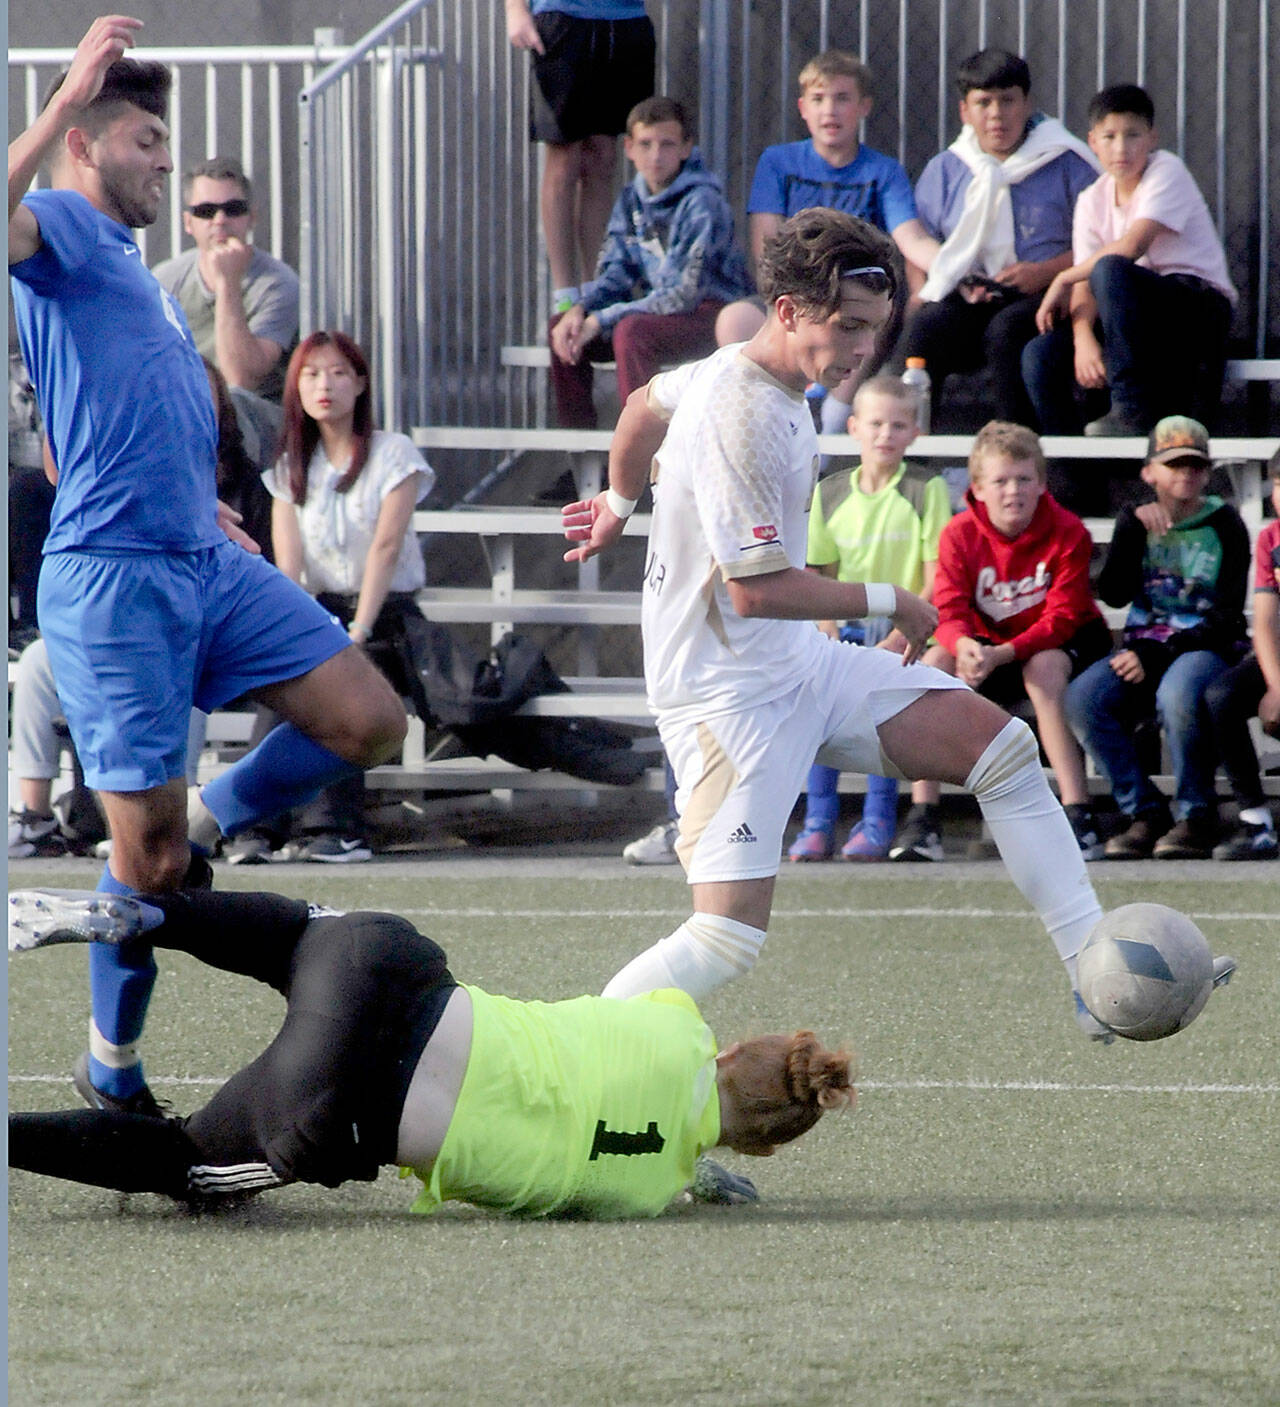 Peninsula’s Pau Vivas right, takes advantage of a loose ball missed by Edmonds’ goalkeeper Devon Collins, leaving a wide open net to score a goal as Edmond’s Aaron Diaz, left, tries to avoid a collision during the first half on Wednesday in Port Angeles. (Keith Thorpe/Peninsula Daily News)